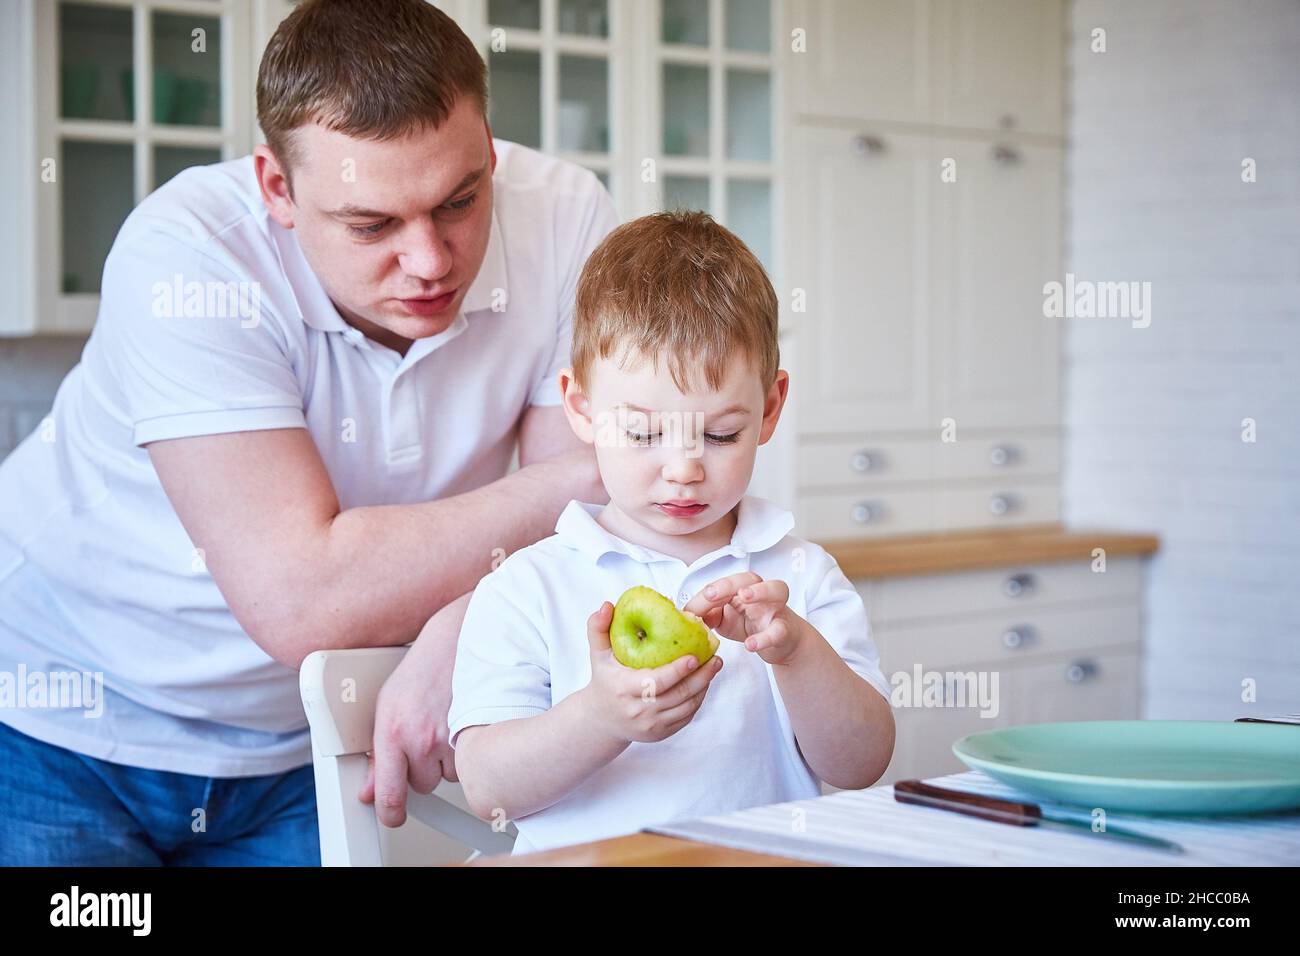 boy with his father in the kitchen. The child eats an apple. Copy space Stock Photo